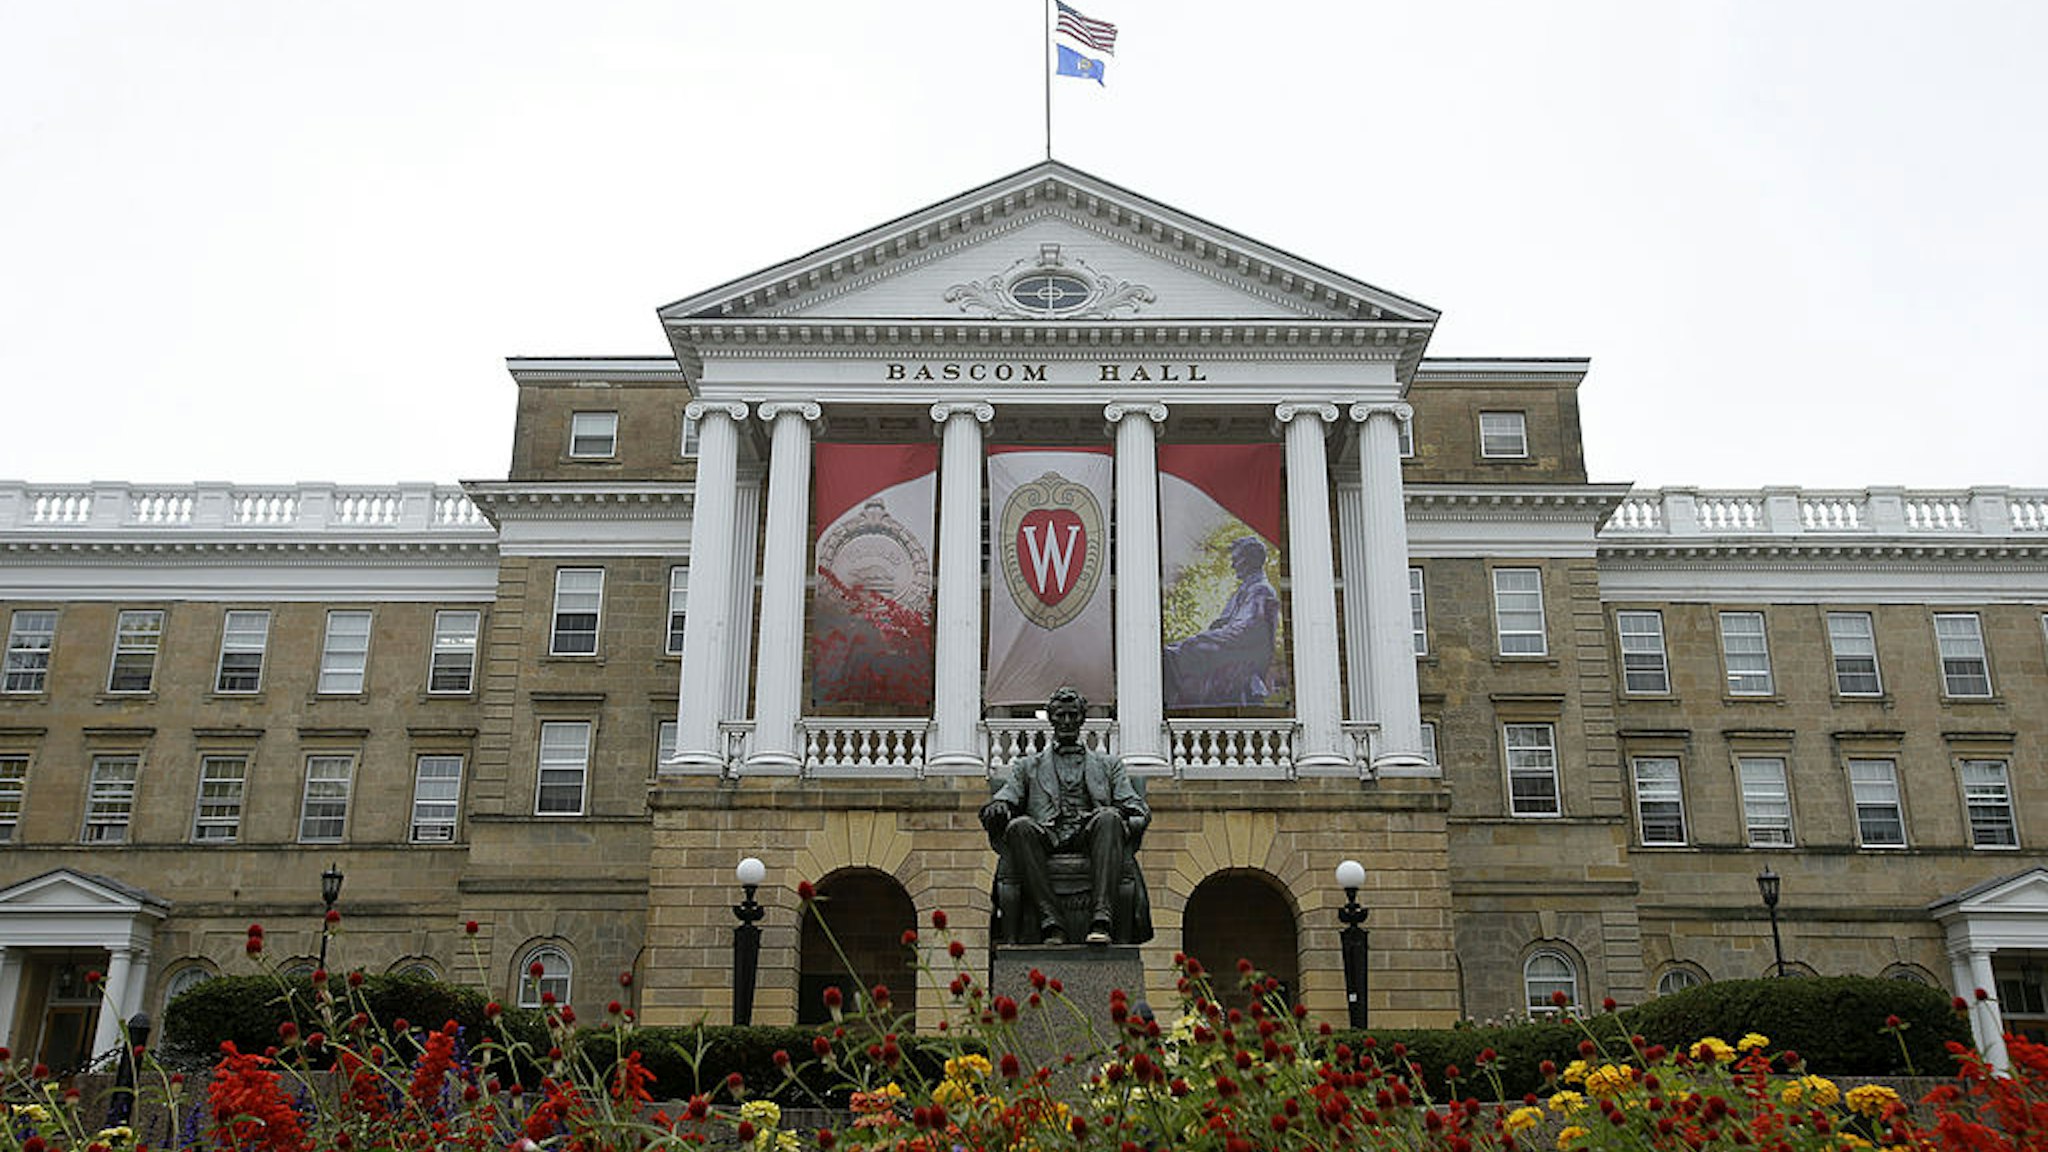 MADISON, WI - OCTOBER 12: An outside view of Bascom Hall on the campus of the University of Wisconsin on October 12, 2013 in Madison, Wisconsin.